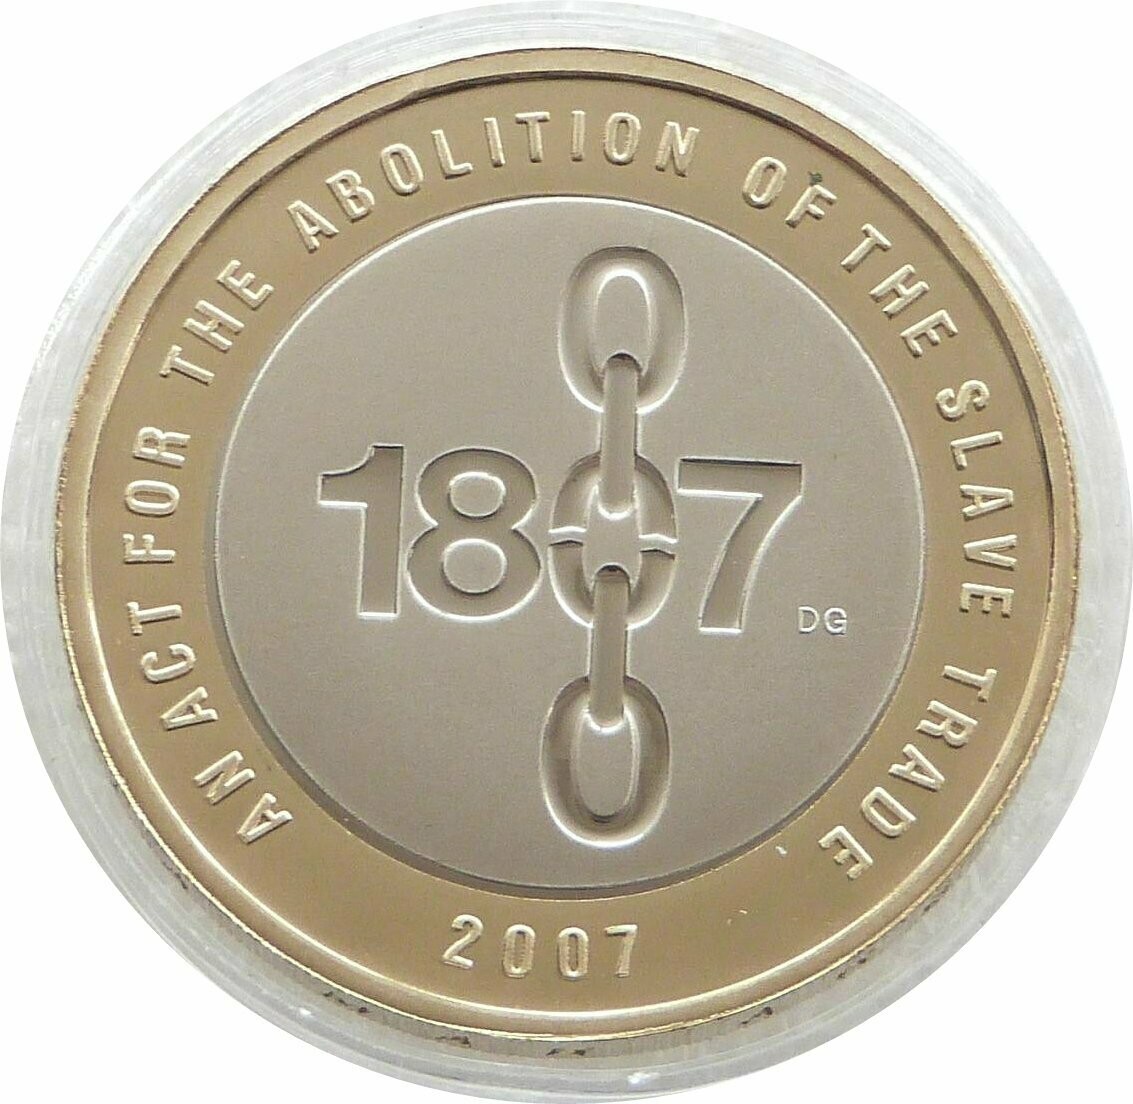 2007 Abolition of the Slave Trade £2 Proof Coin